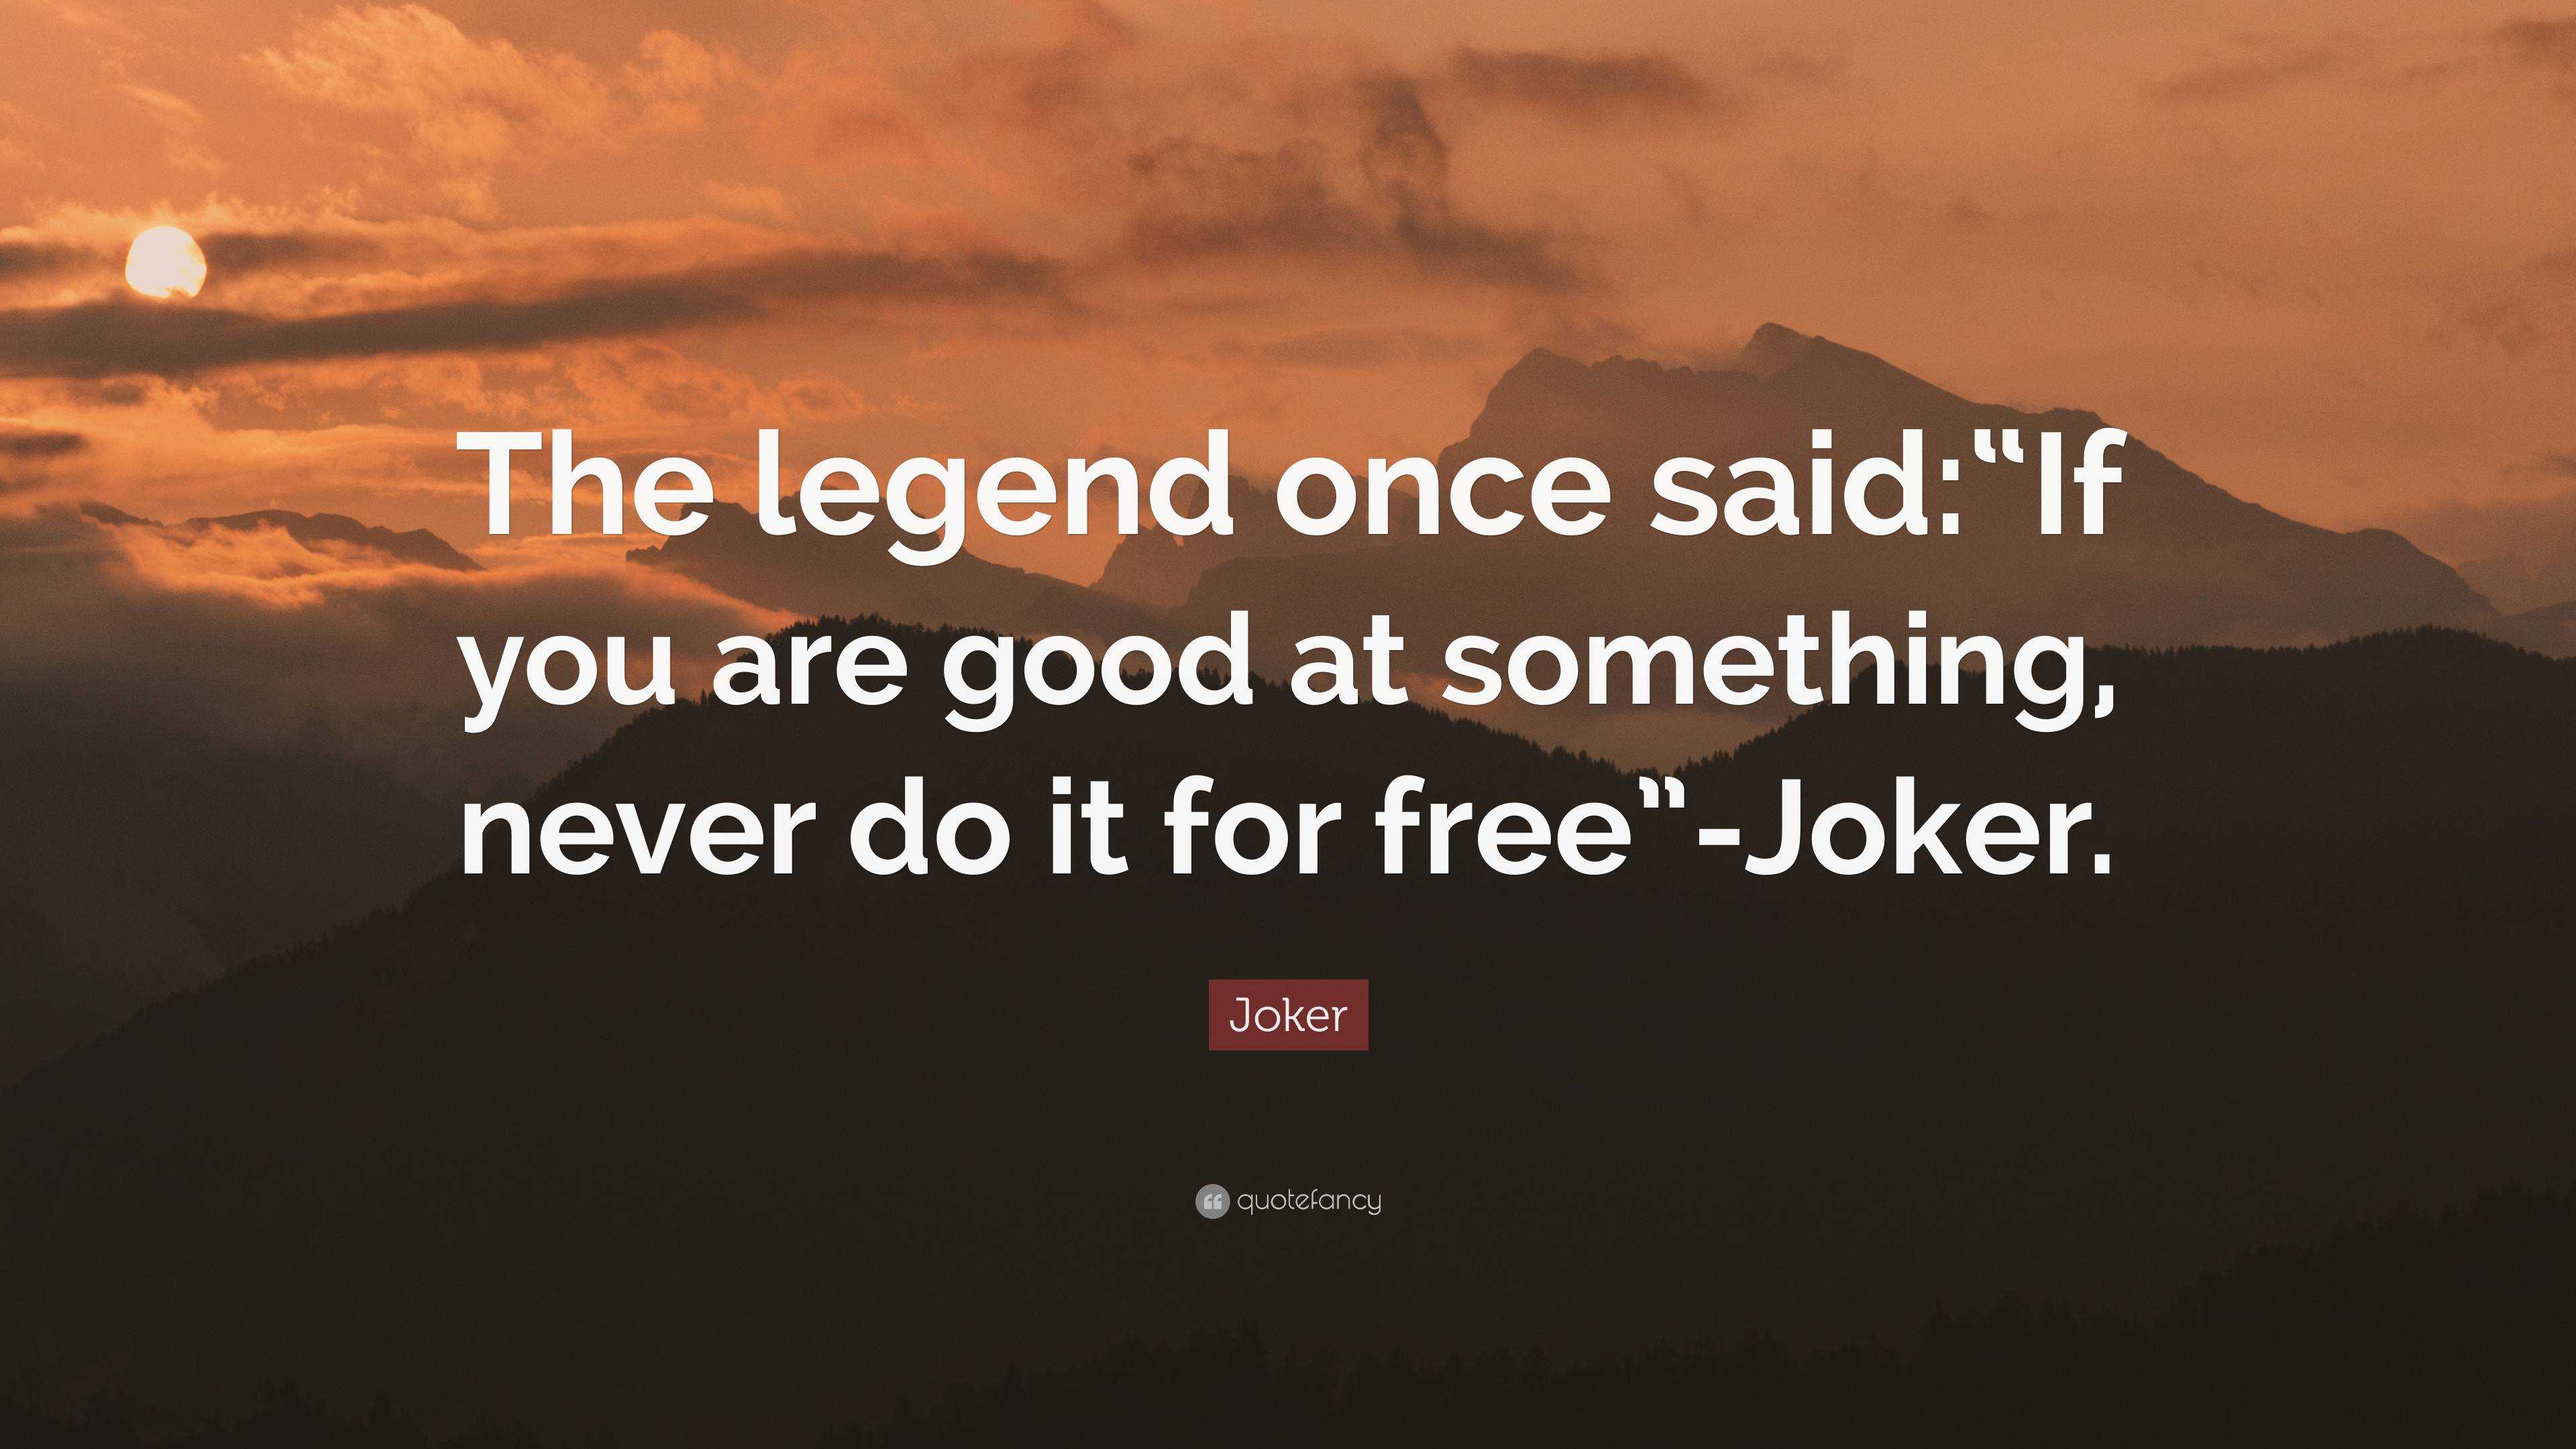 Joker quotes - #life is a game 👈